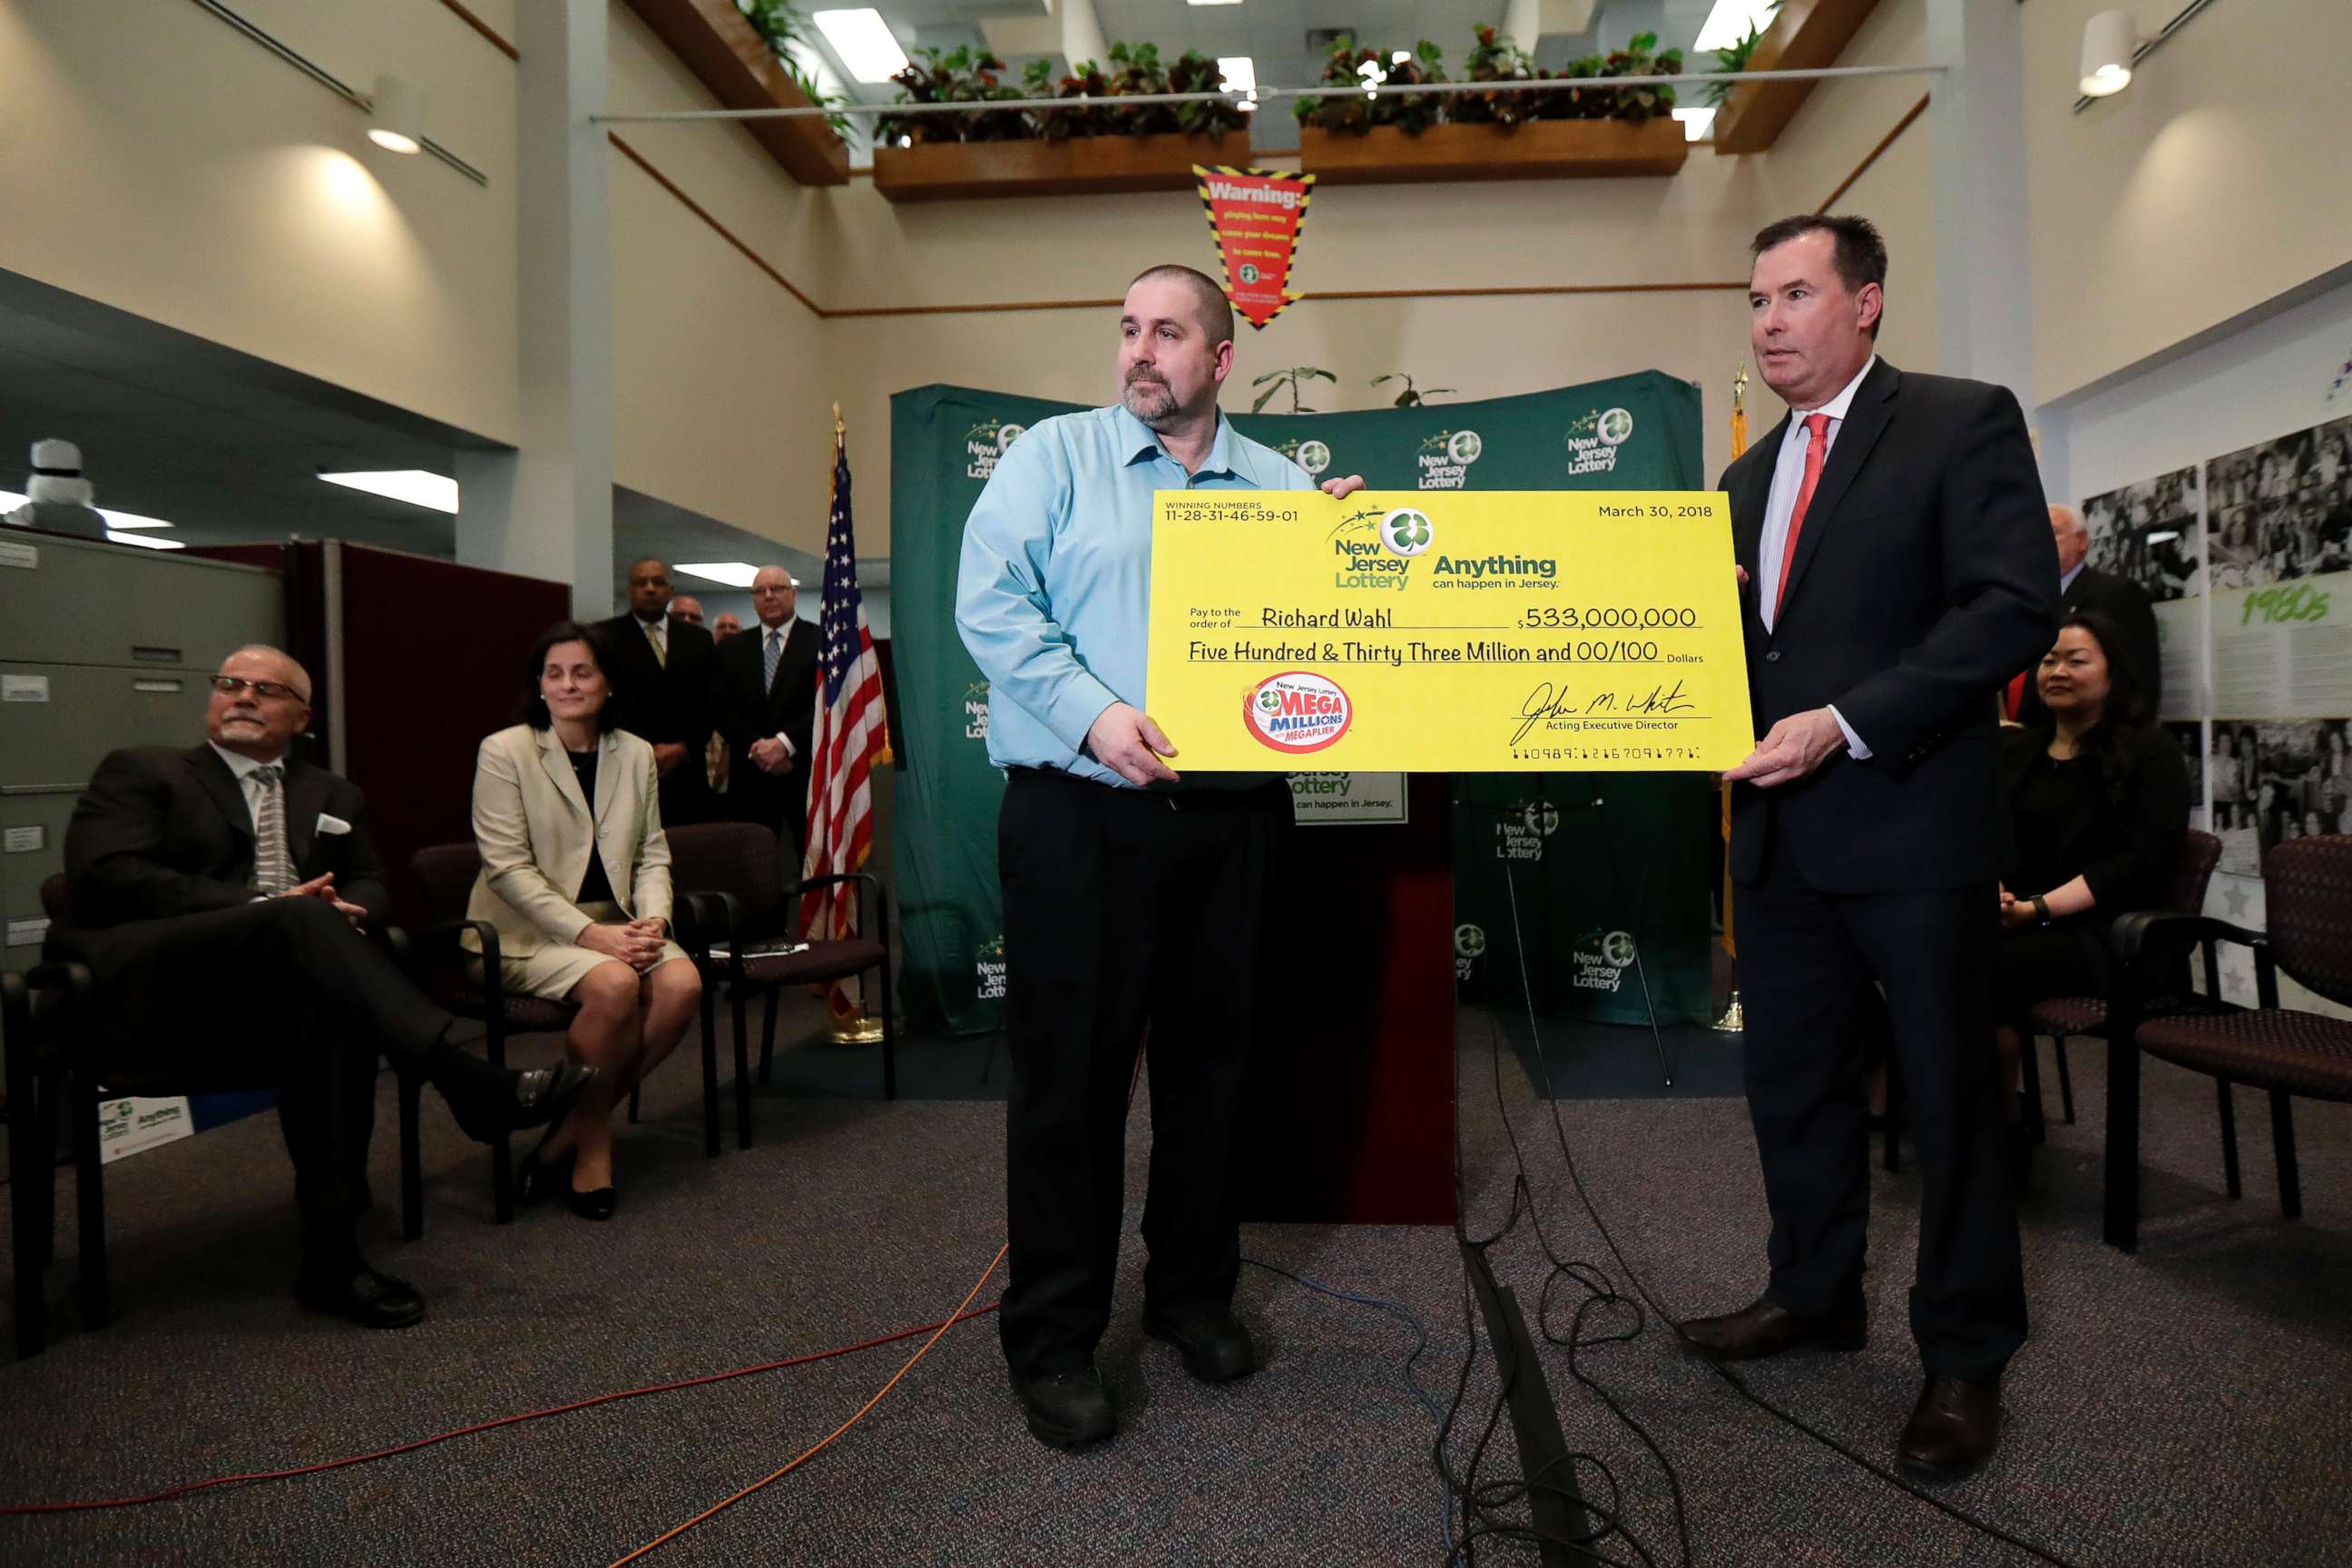 PHOTO: Richard Wahl poses for photos with the New Jersey Lottery Acting Executive Director during a news conference introducing Wahl as the $533 million Mega Millions jackpot winner at the New Jersey Lottery headquarters, April 13, 2018, in Trenton, N.J.